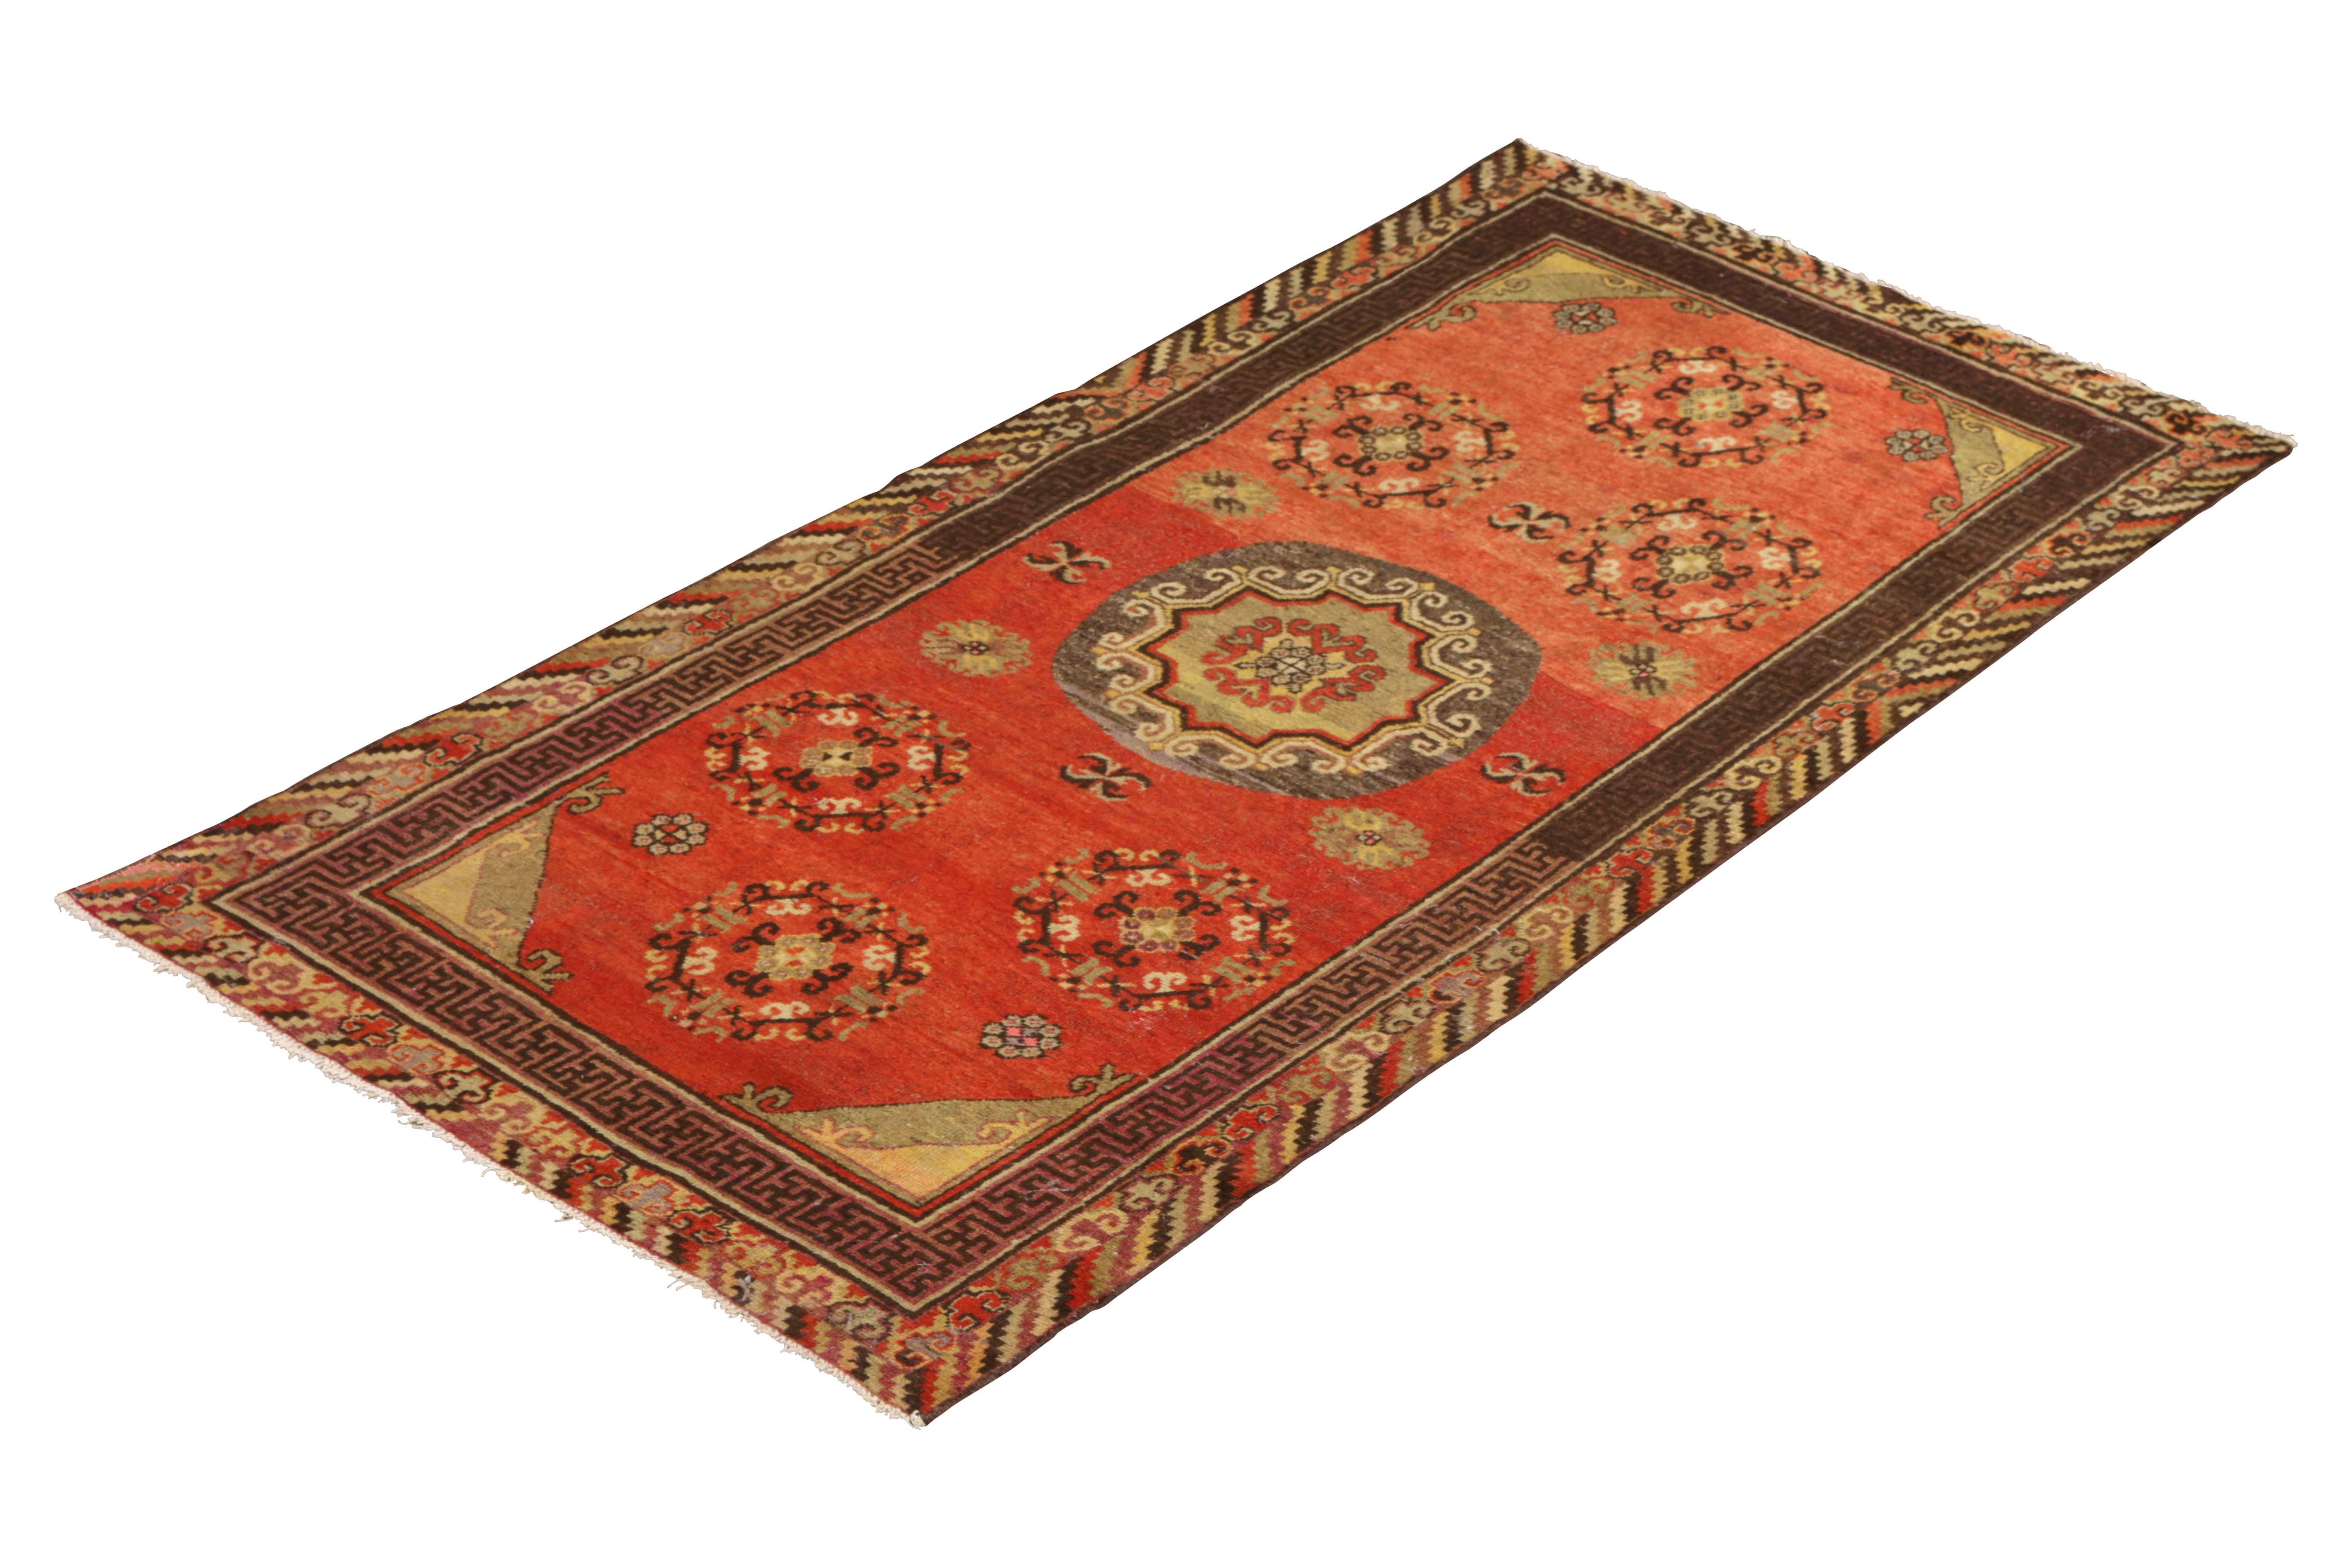 Hand knotted in wool originating from East Turkestan circa 1890-1900, this antique rug connotes a classic Khotan rug design with a classic approach to transitional colorway celebrated in this Oriental rug family. Favoring the cloud band pattern in